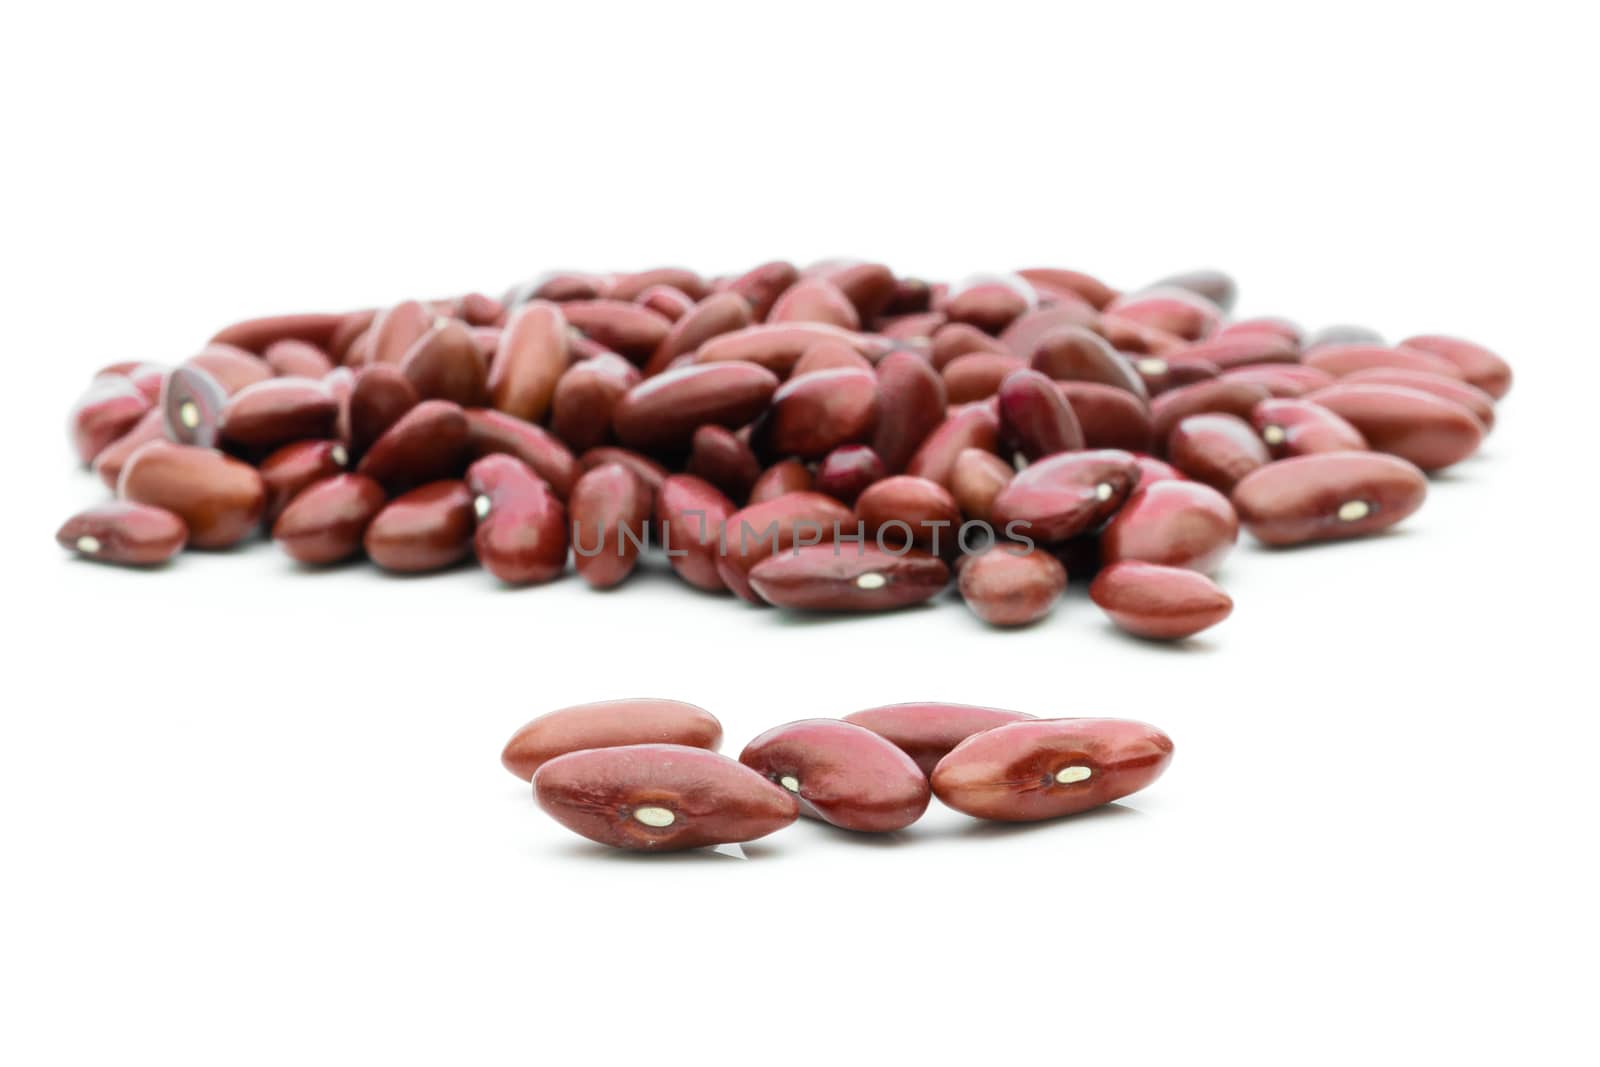 Grains Red beans in a sack on a white background